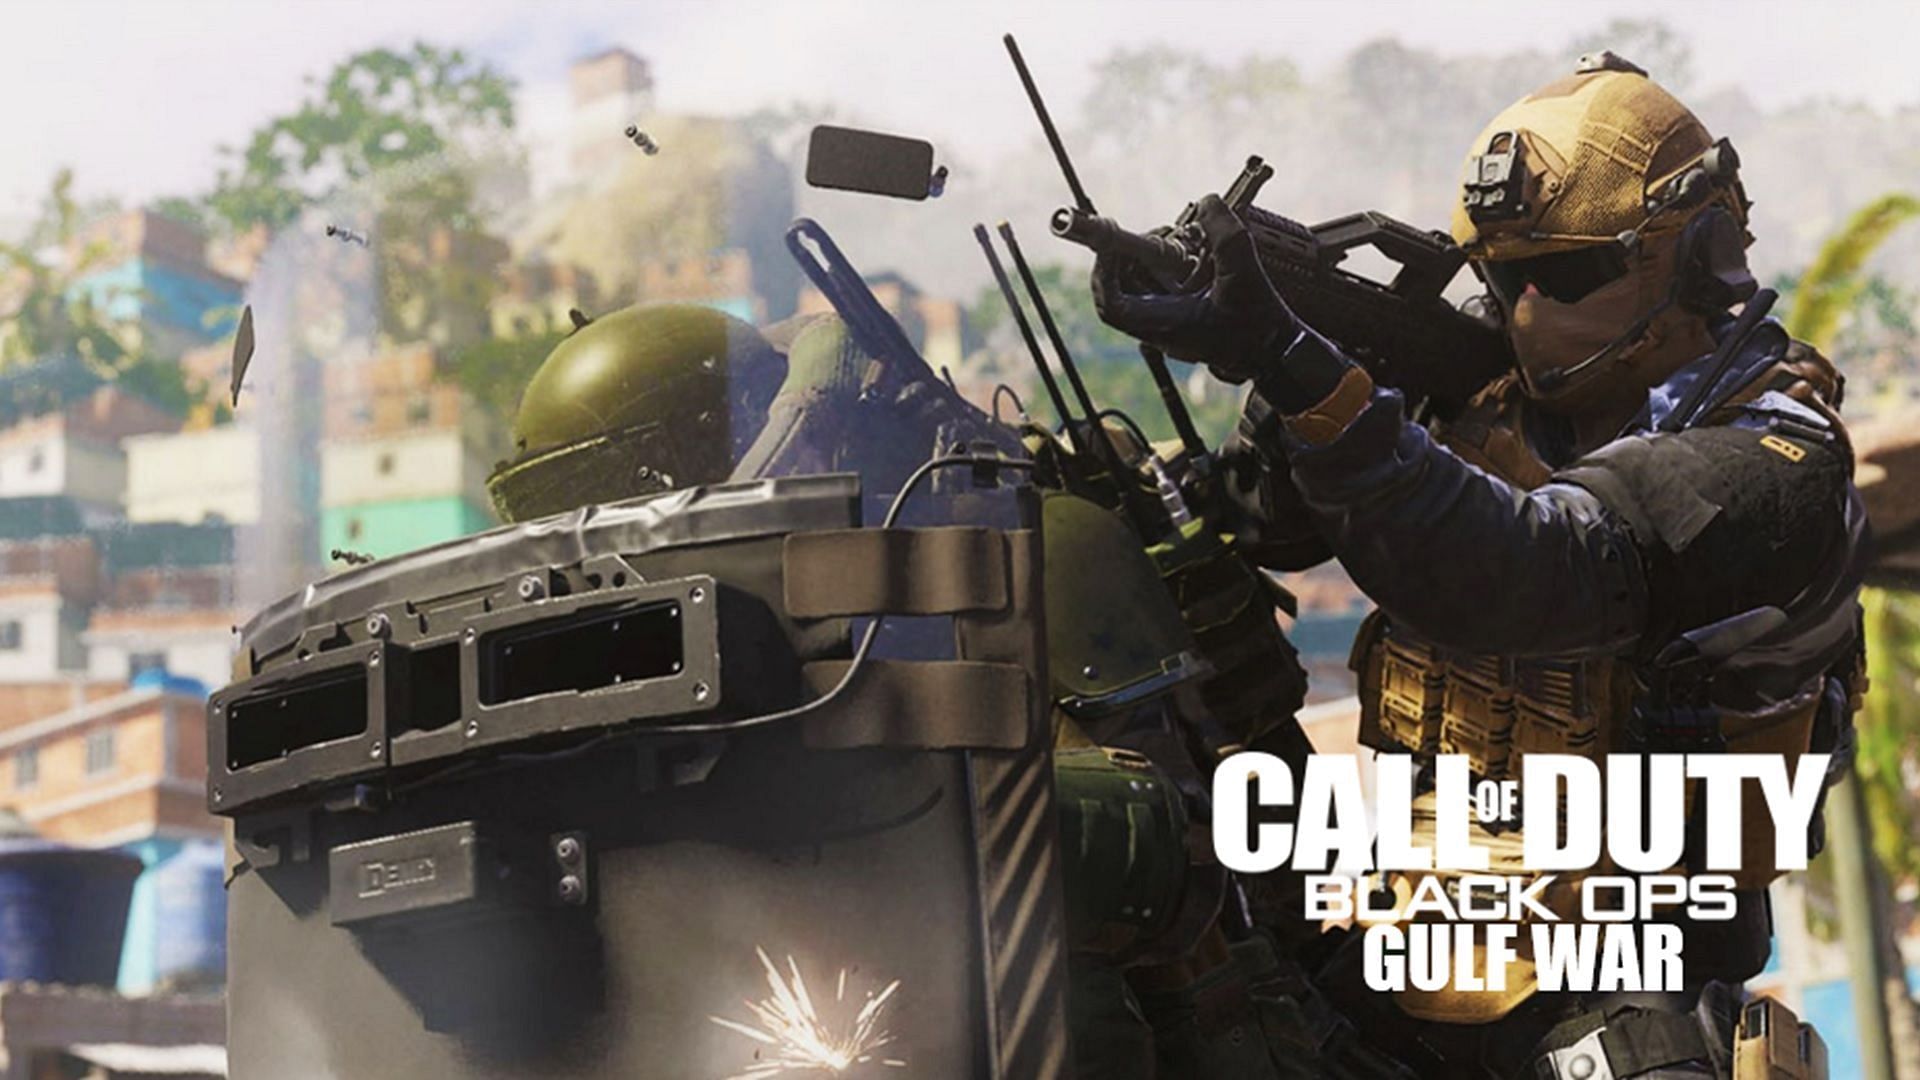 riot shield is rumored to a field upgrade in CoD 2024 Black Ops Gulf War